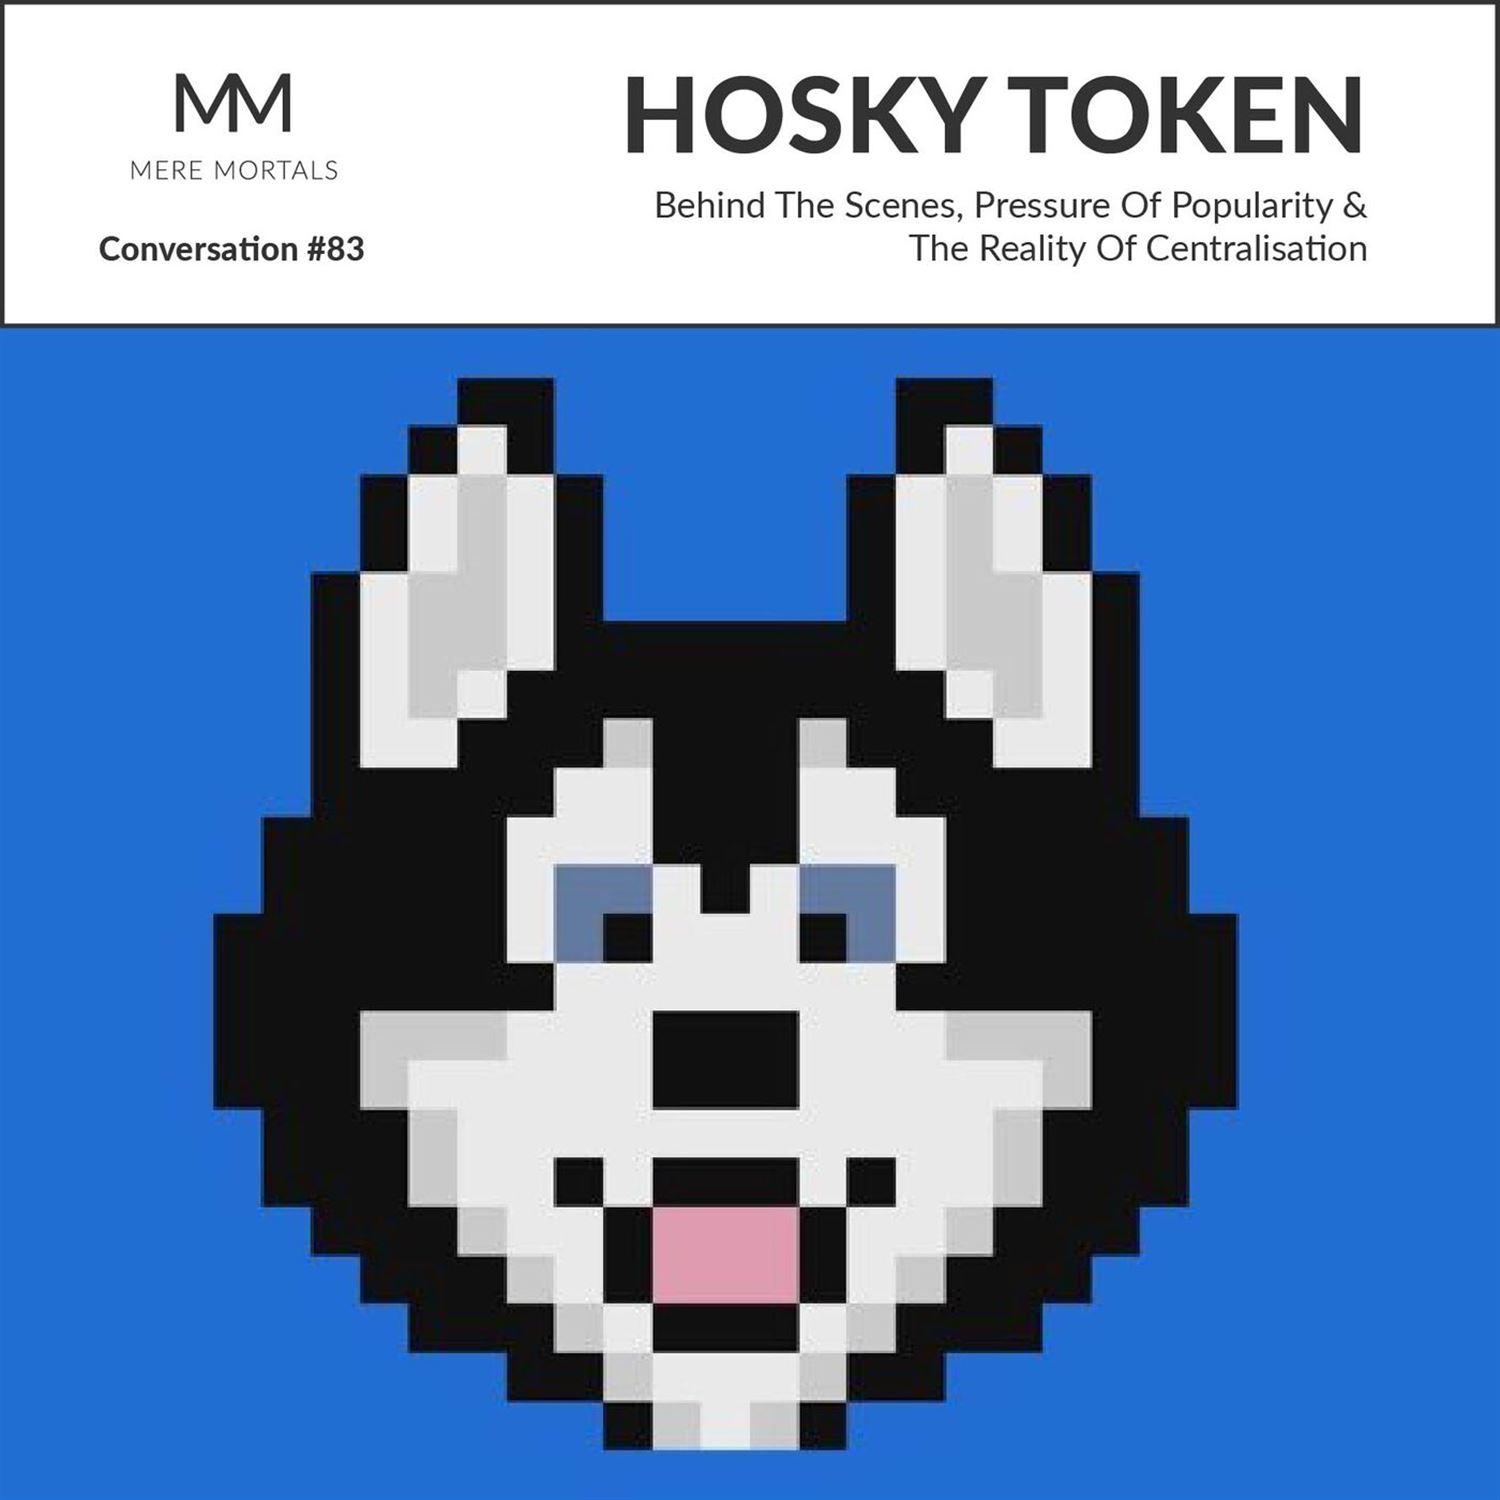 HOSKY TOKEN | Behind The Scenes, Pressure Of Popularity & The Reality Of Centralisation